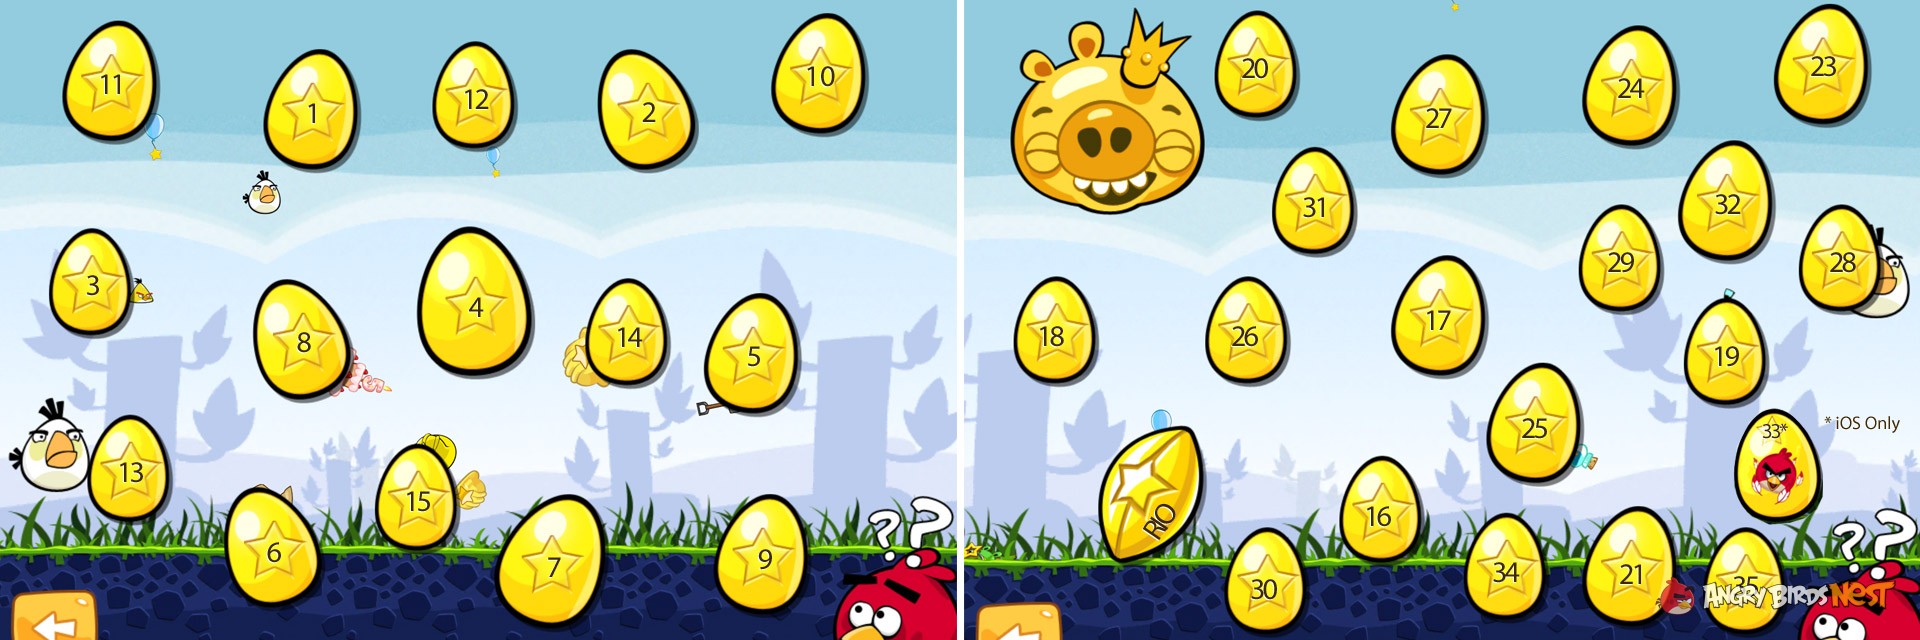 angry birds friends facebook golden eggs missing